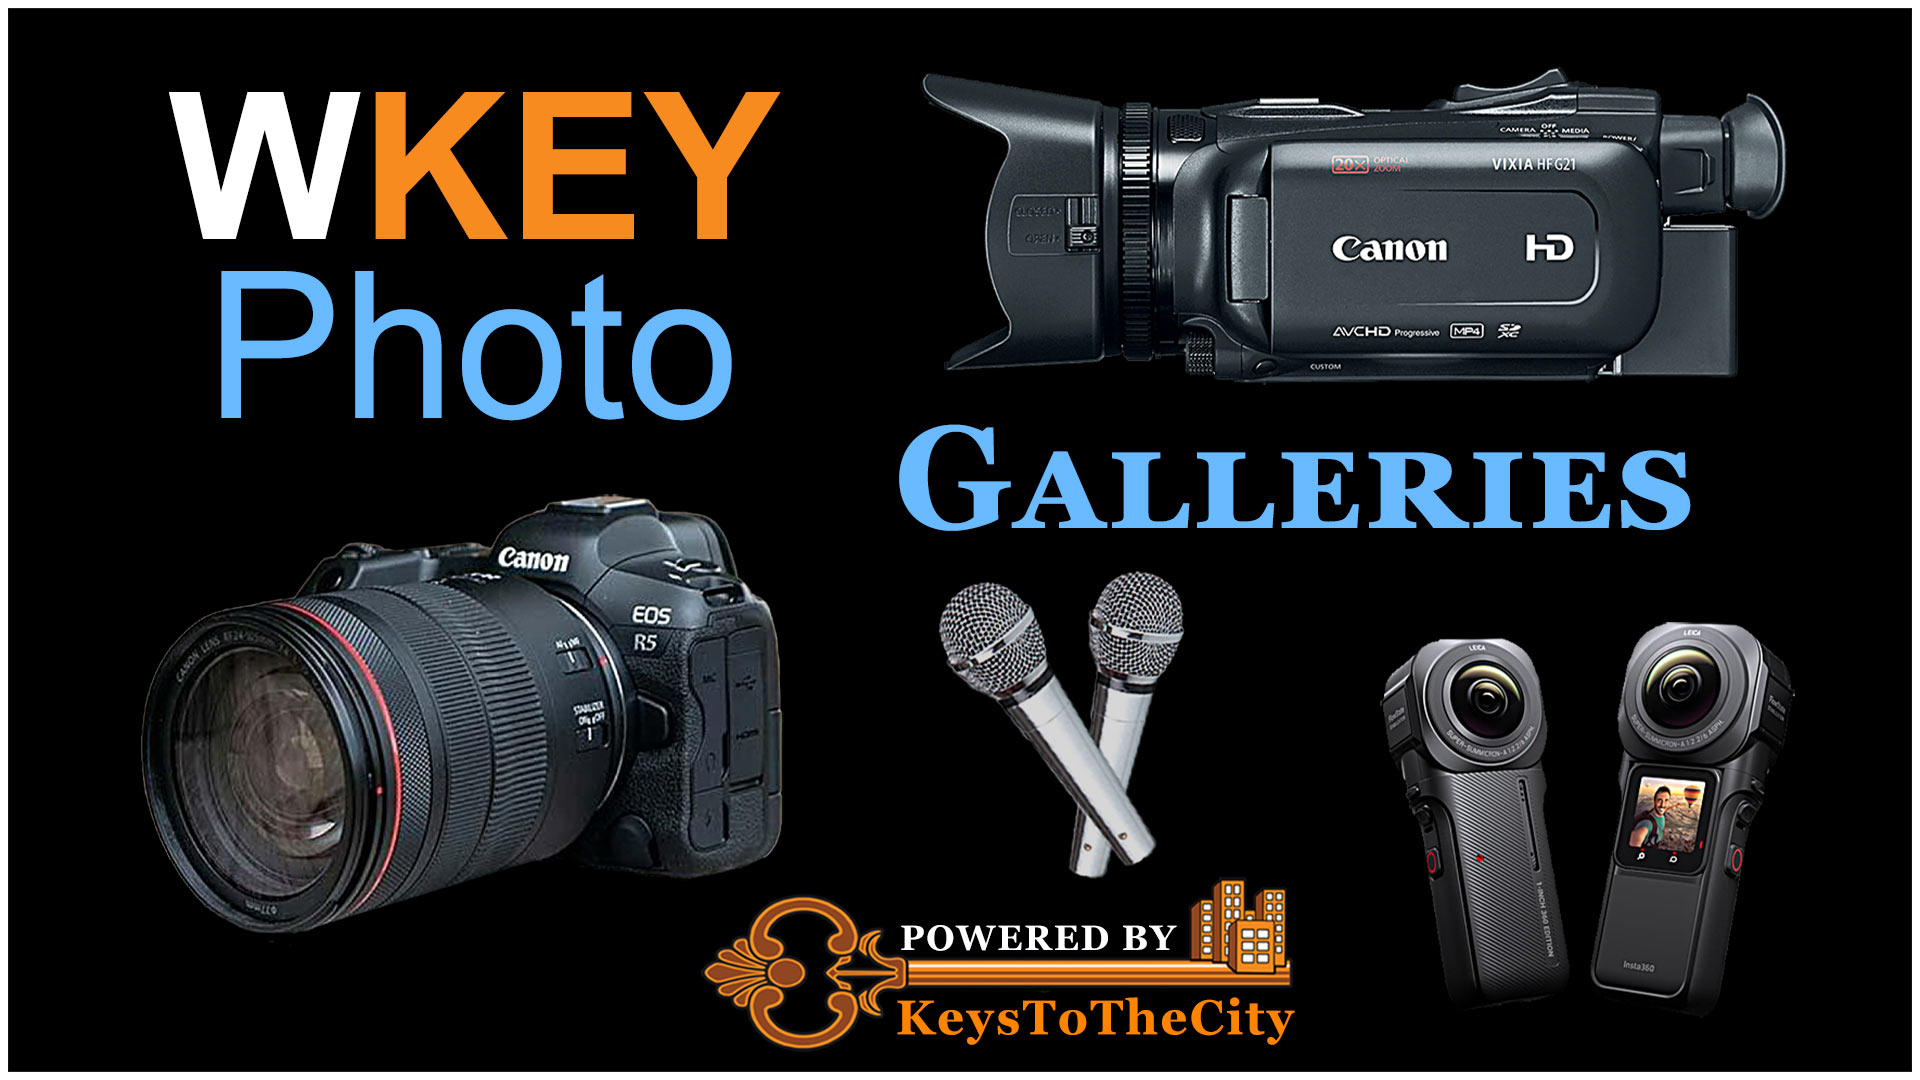 If you spot yourself in our photos, you are more than welcome to download and share with others. aka WKEYphotos.com WKEY.photo